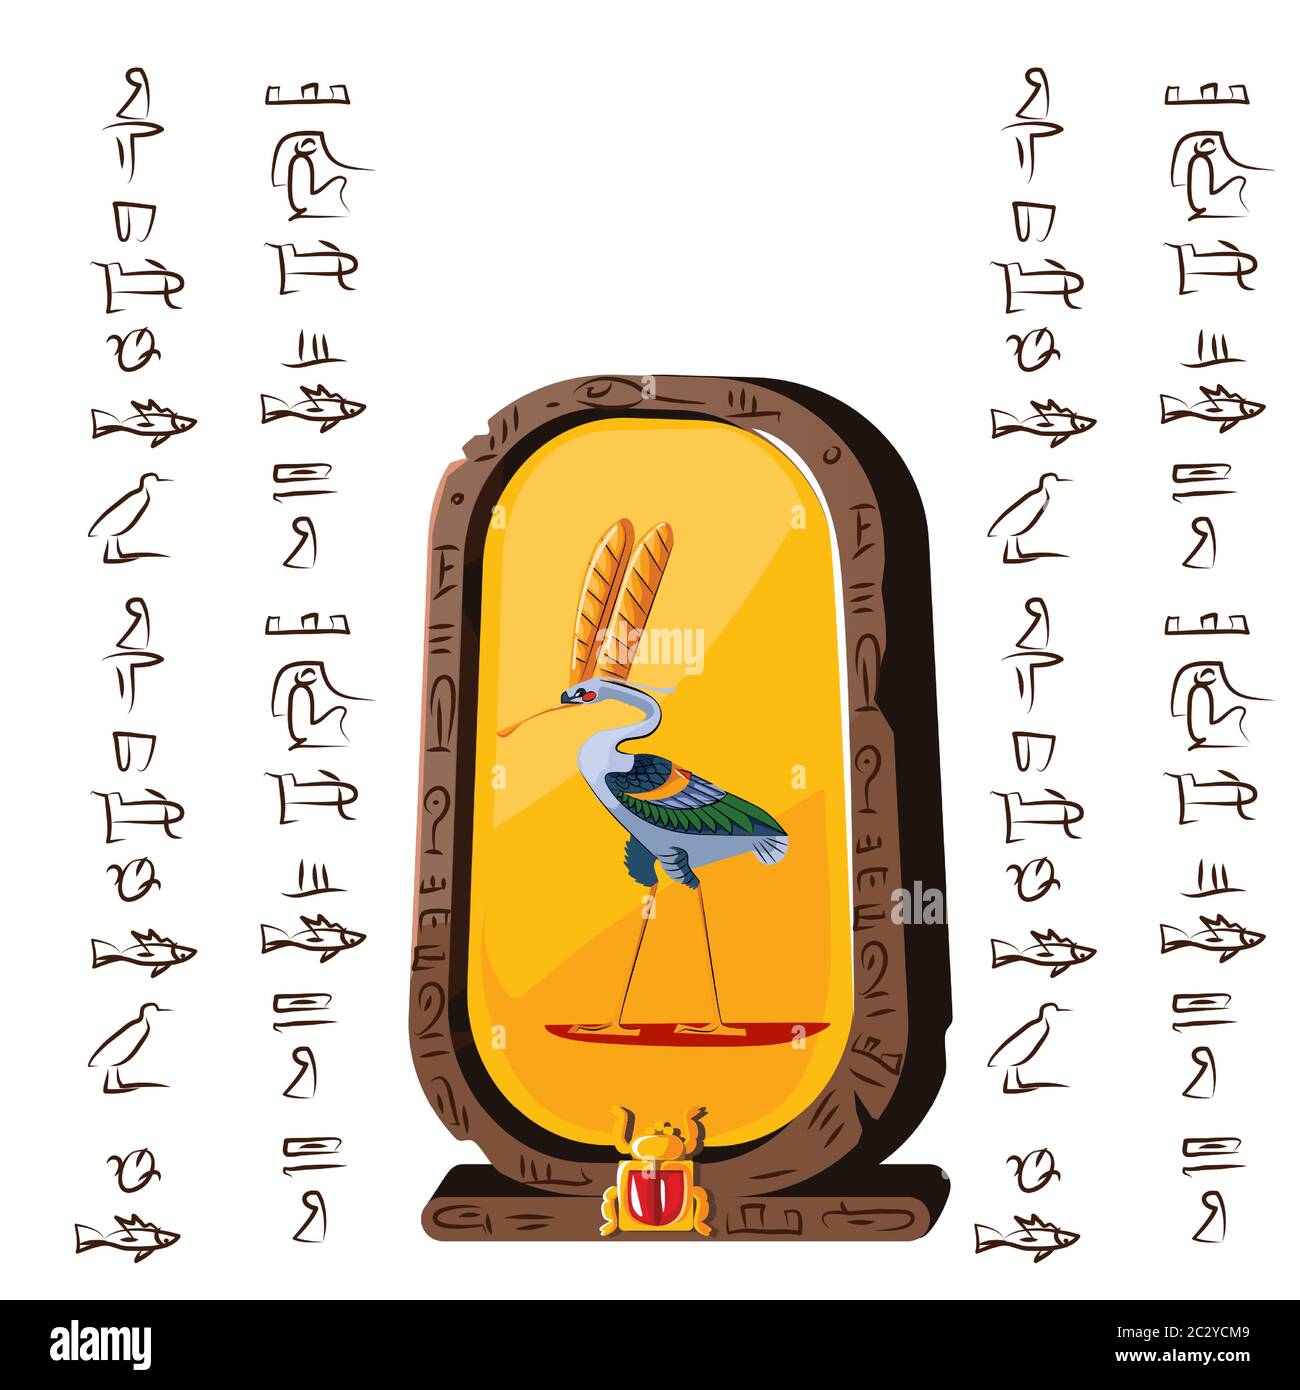 Stone board or clay tablet, ibis and Egyptian hieroglyphs cartoons vector illustration Ancient object for storing information, graphical user interfac Stock Vector